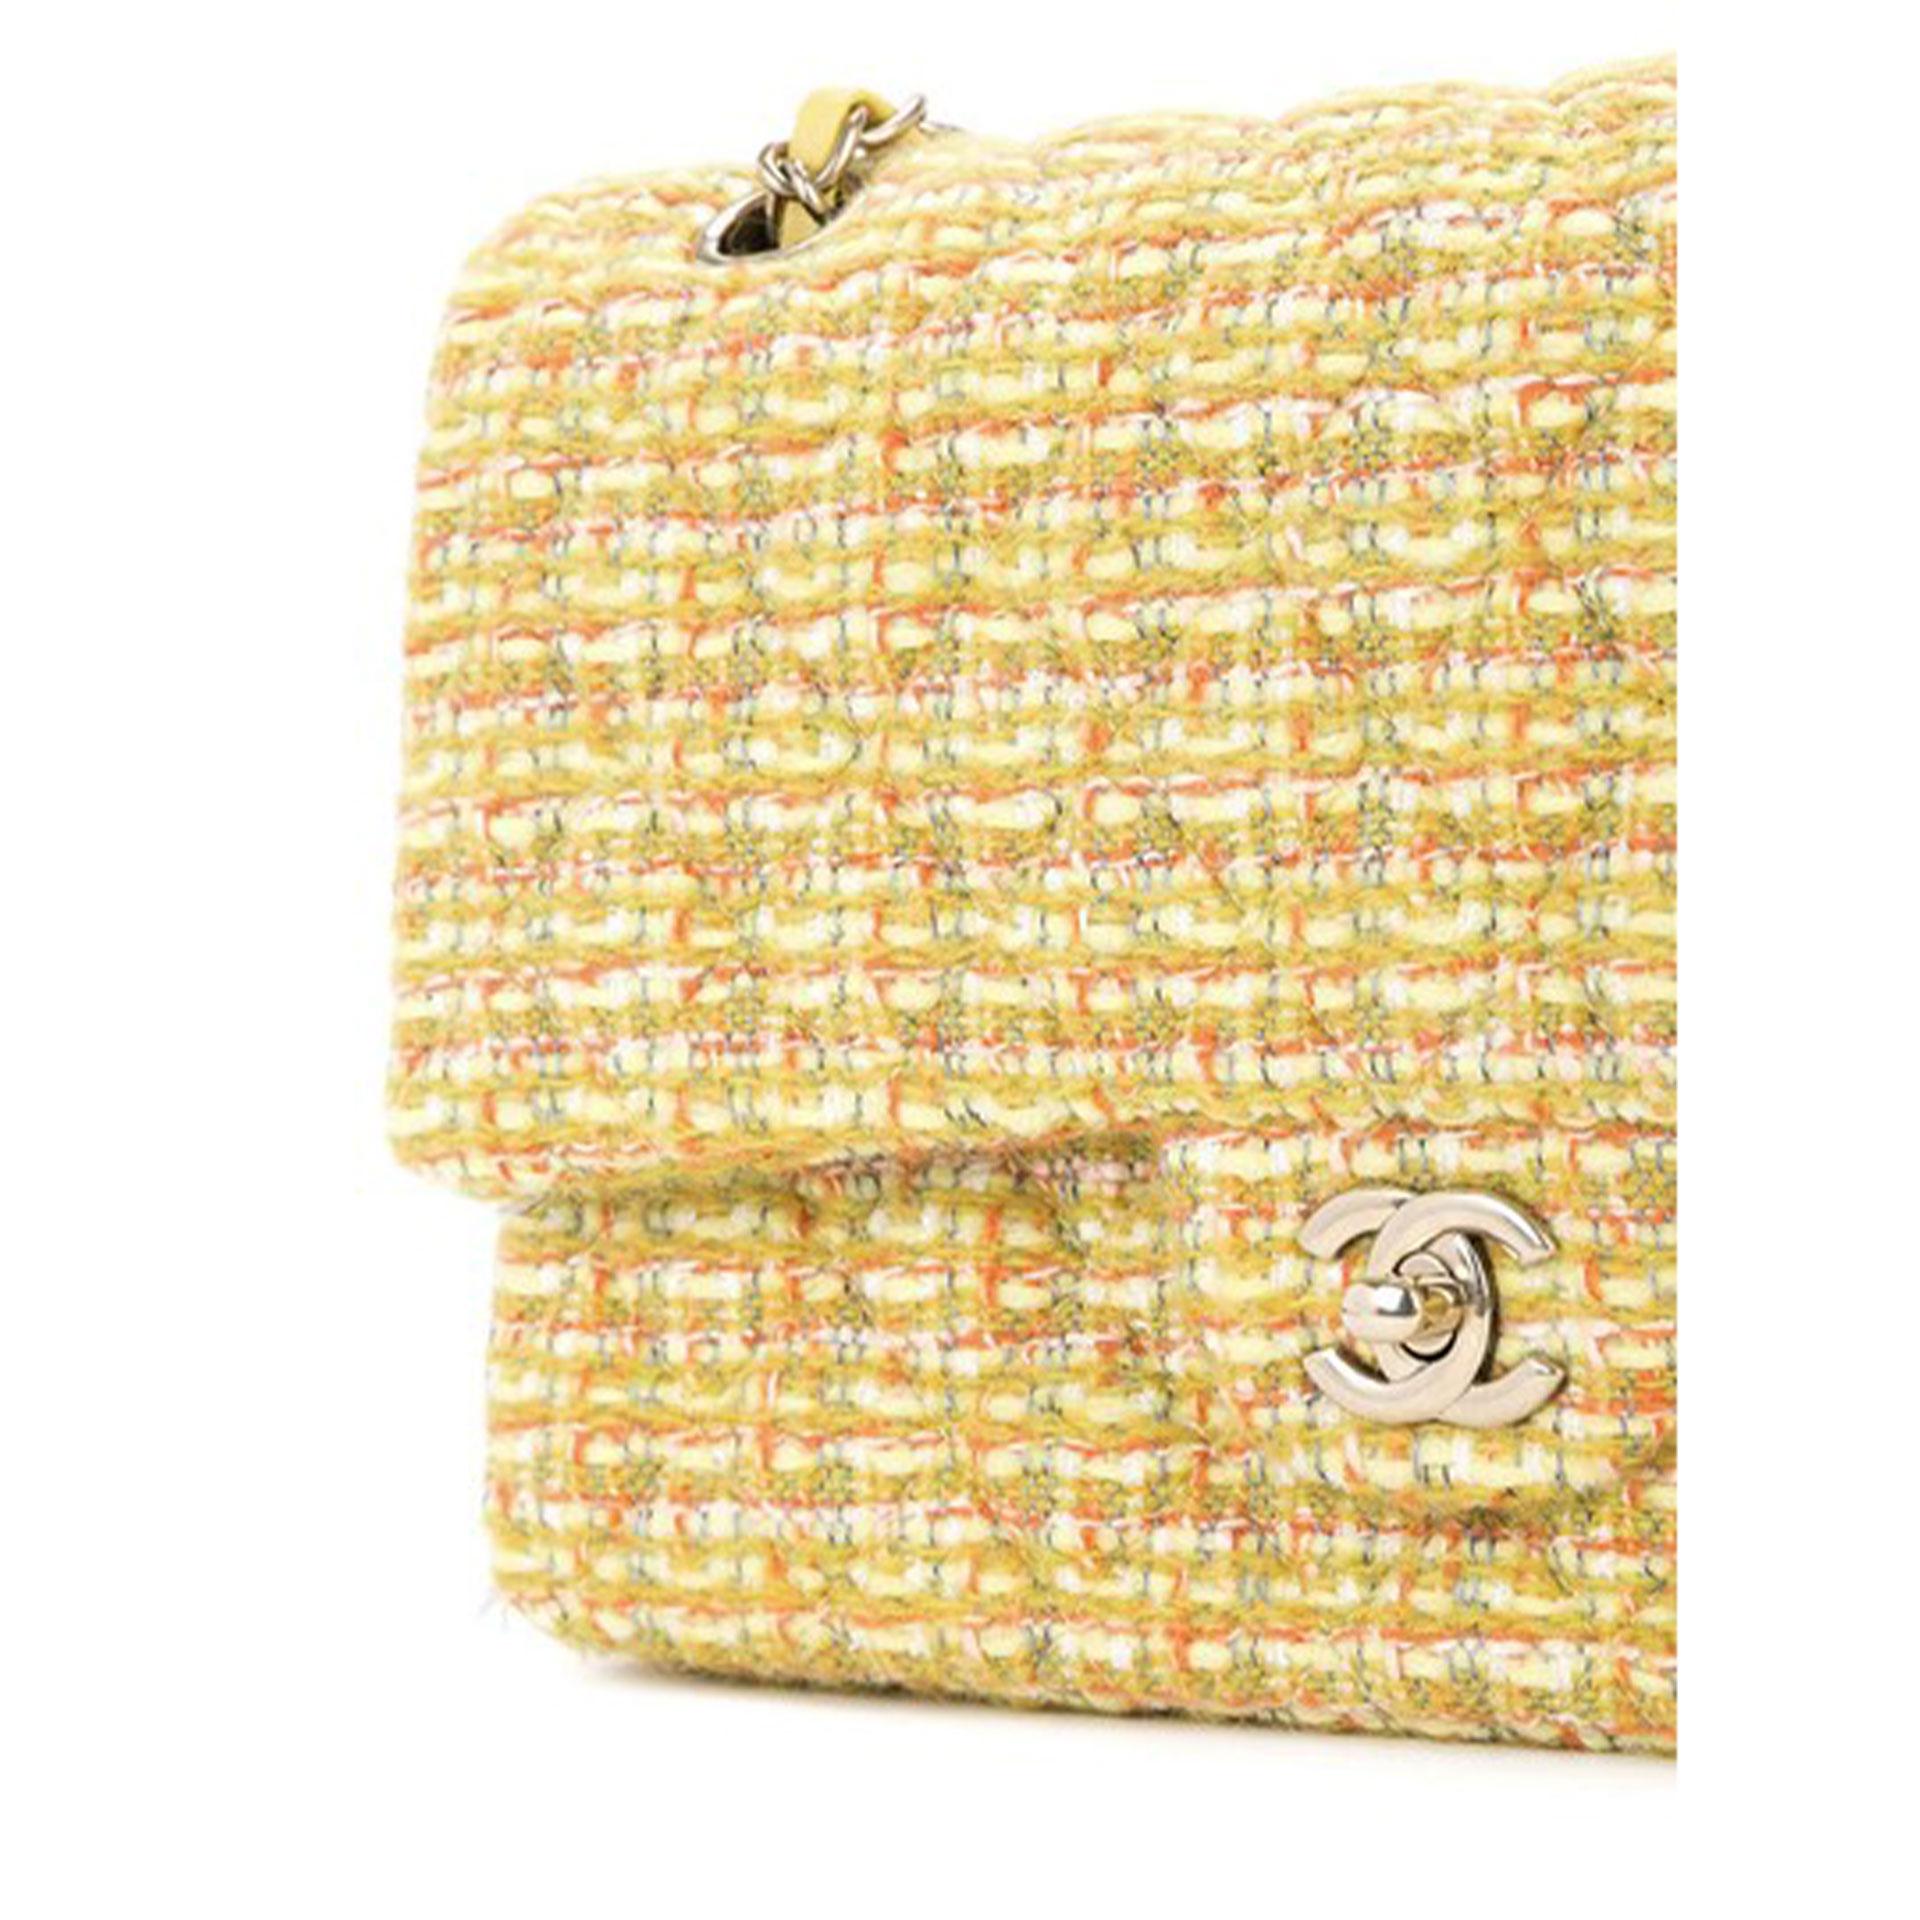 Chanel Classic Flap 2.55 Reissue Fall 2014 Yellow Tweed Shoulder Bag For Sale 1